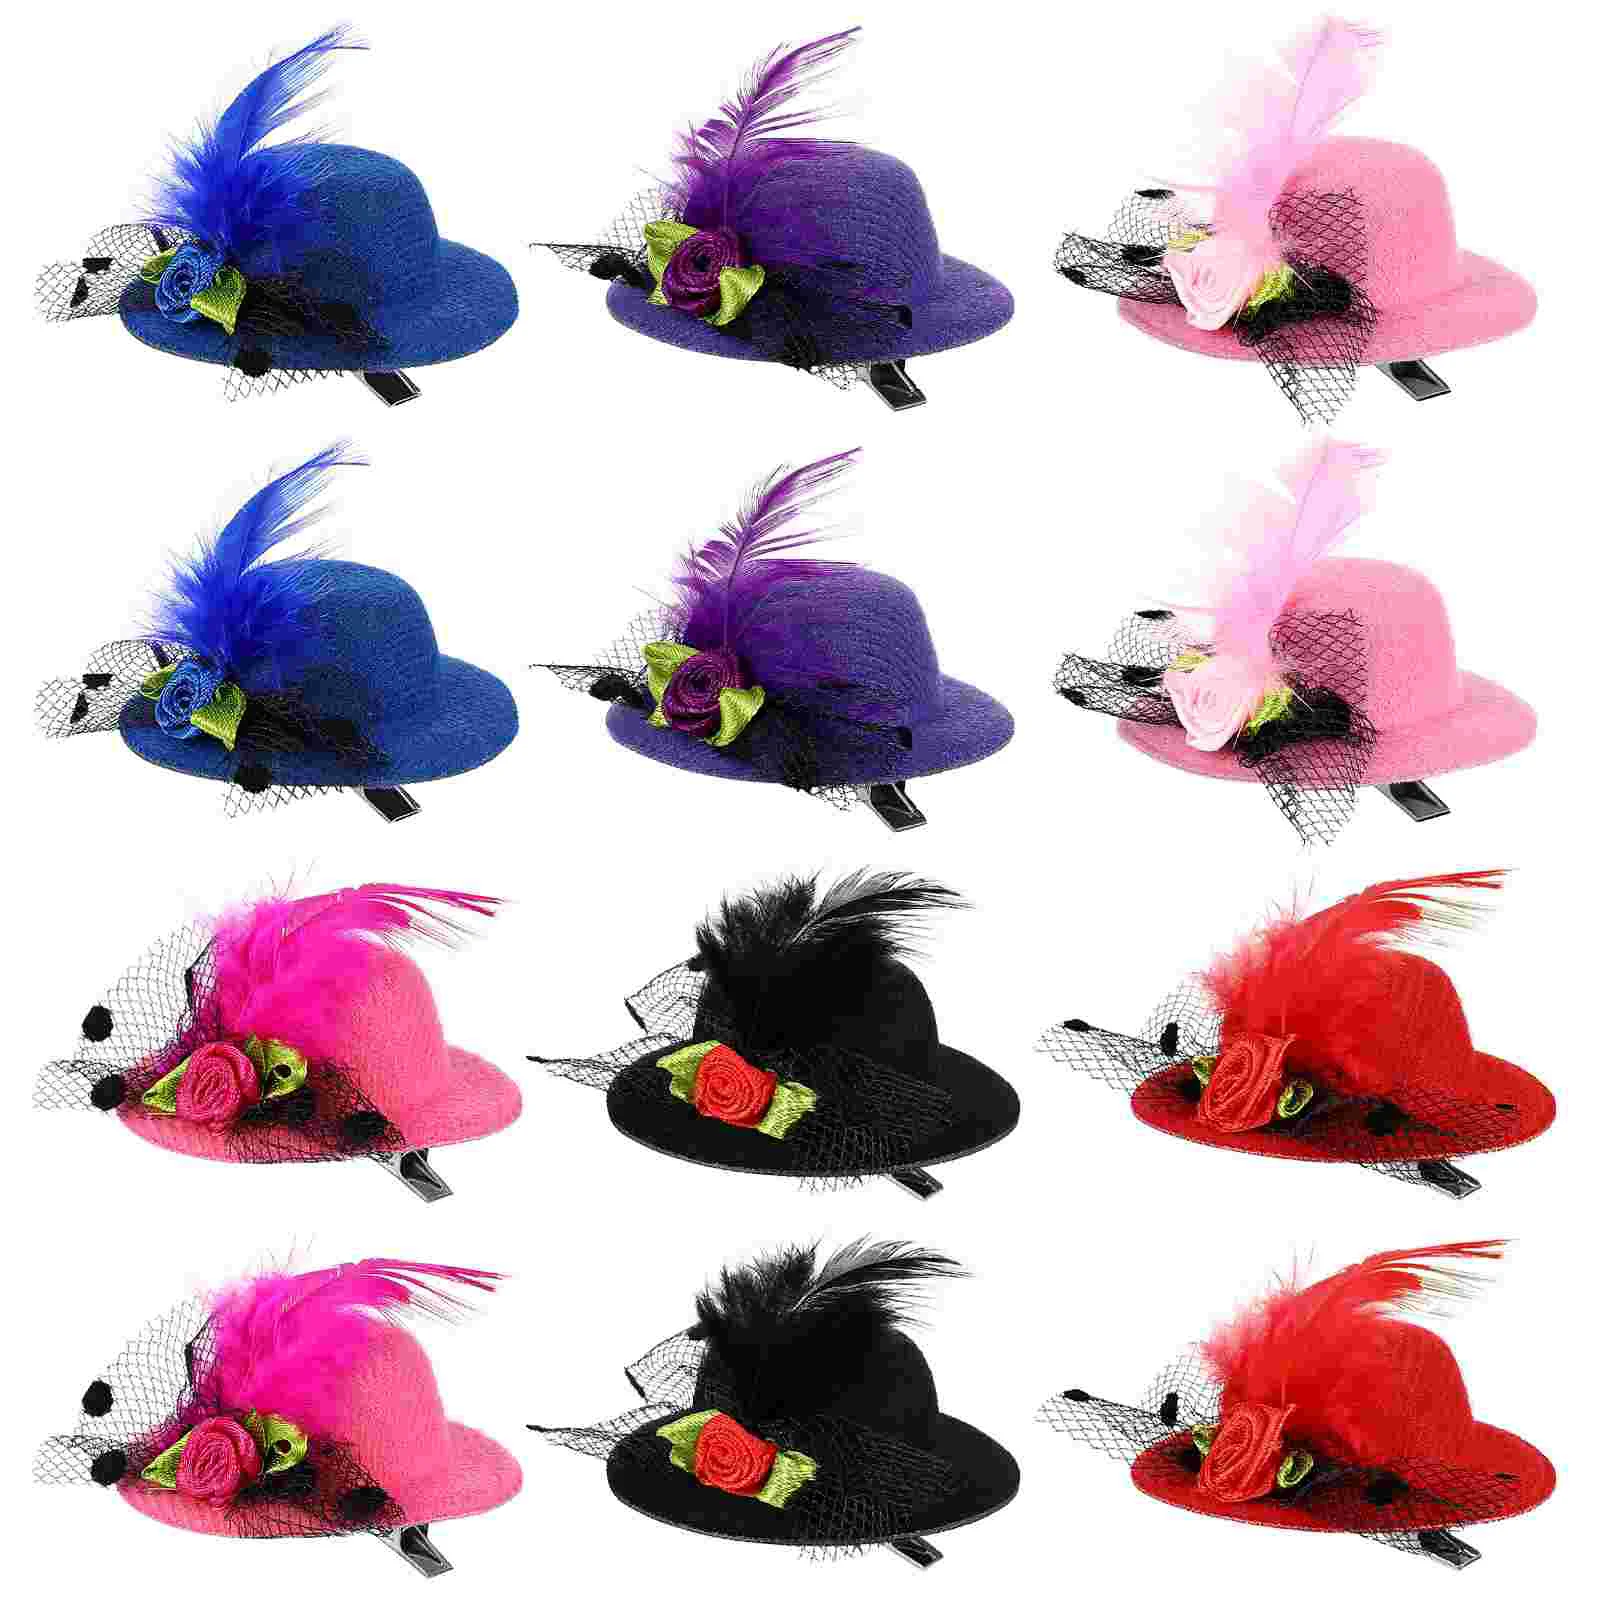 

12pcs Hat Hair Clip, Mesh Bow Hair Barrette Flower Hair Hairpin Fascinator Decorative for Toddler Party Costume Accessory ( )